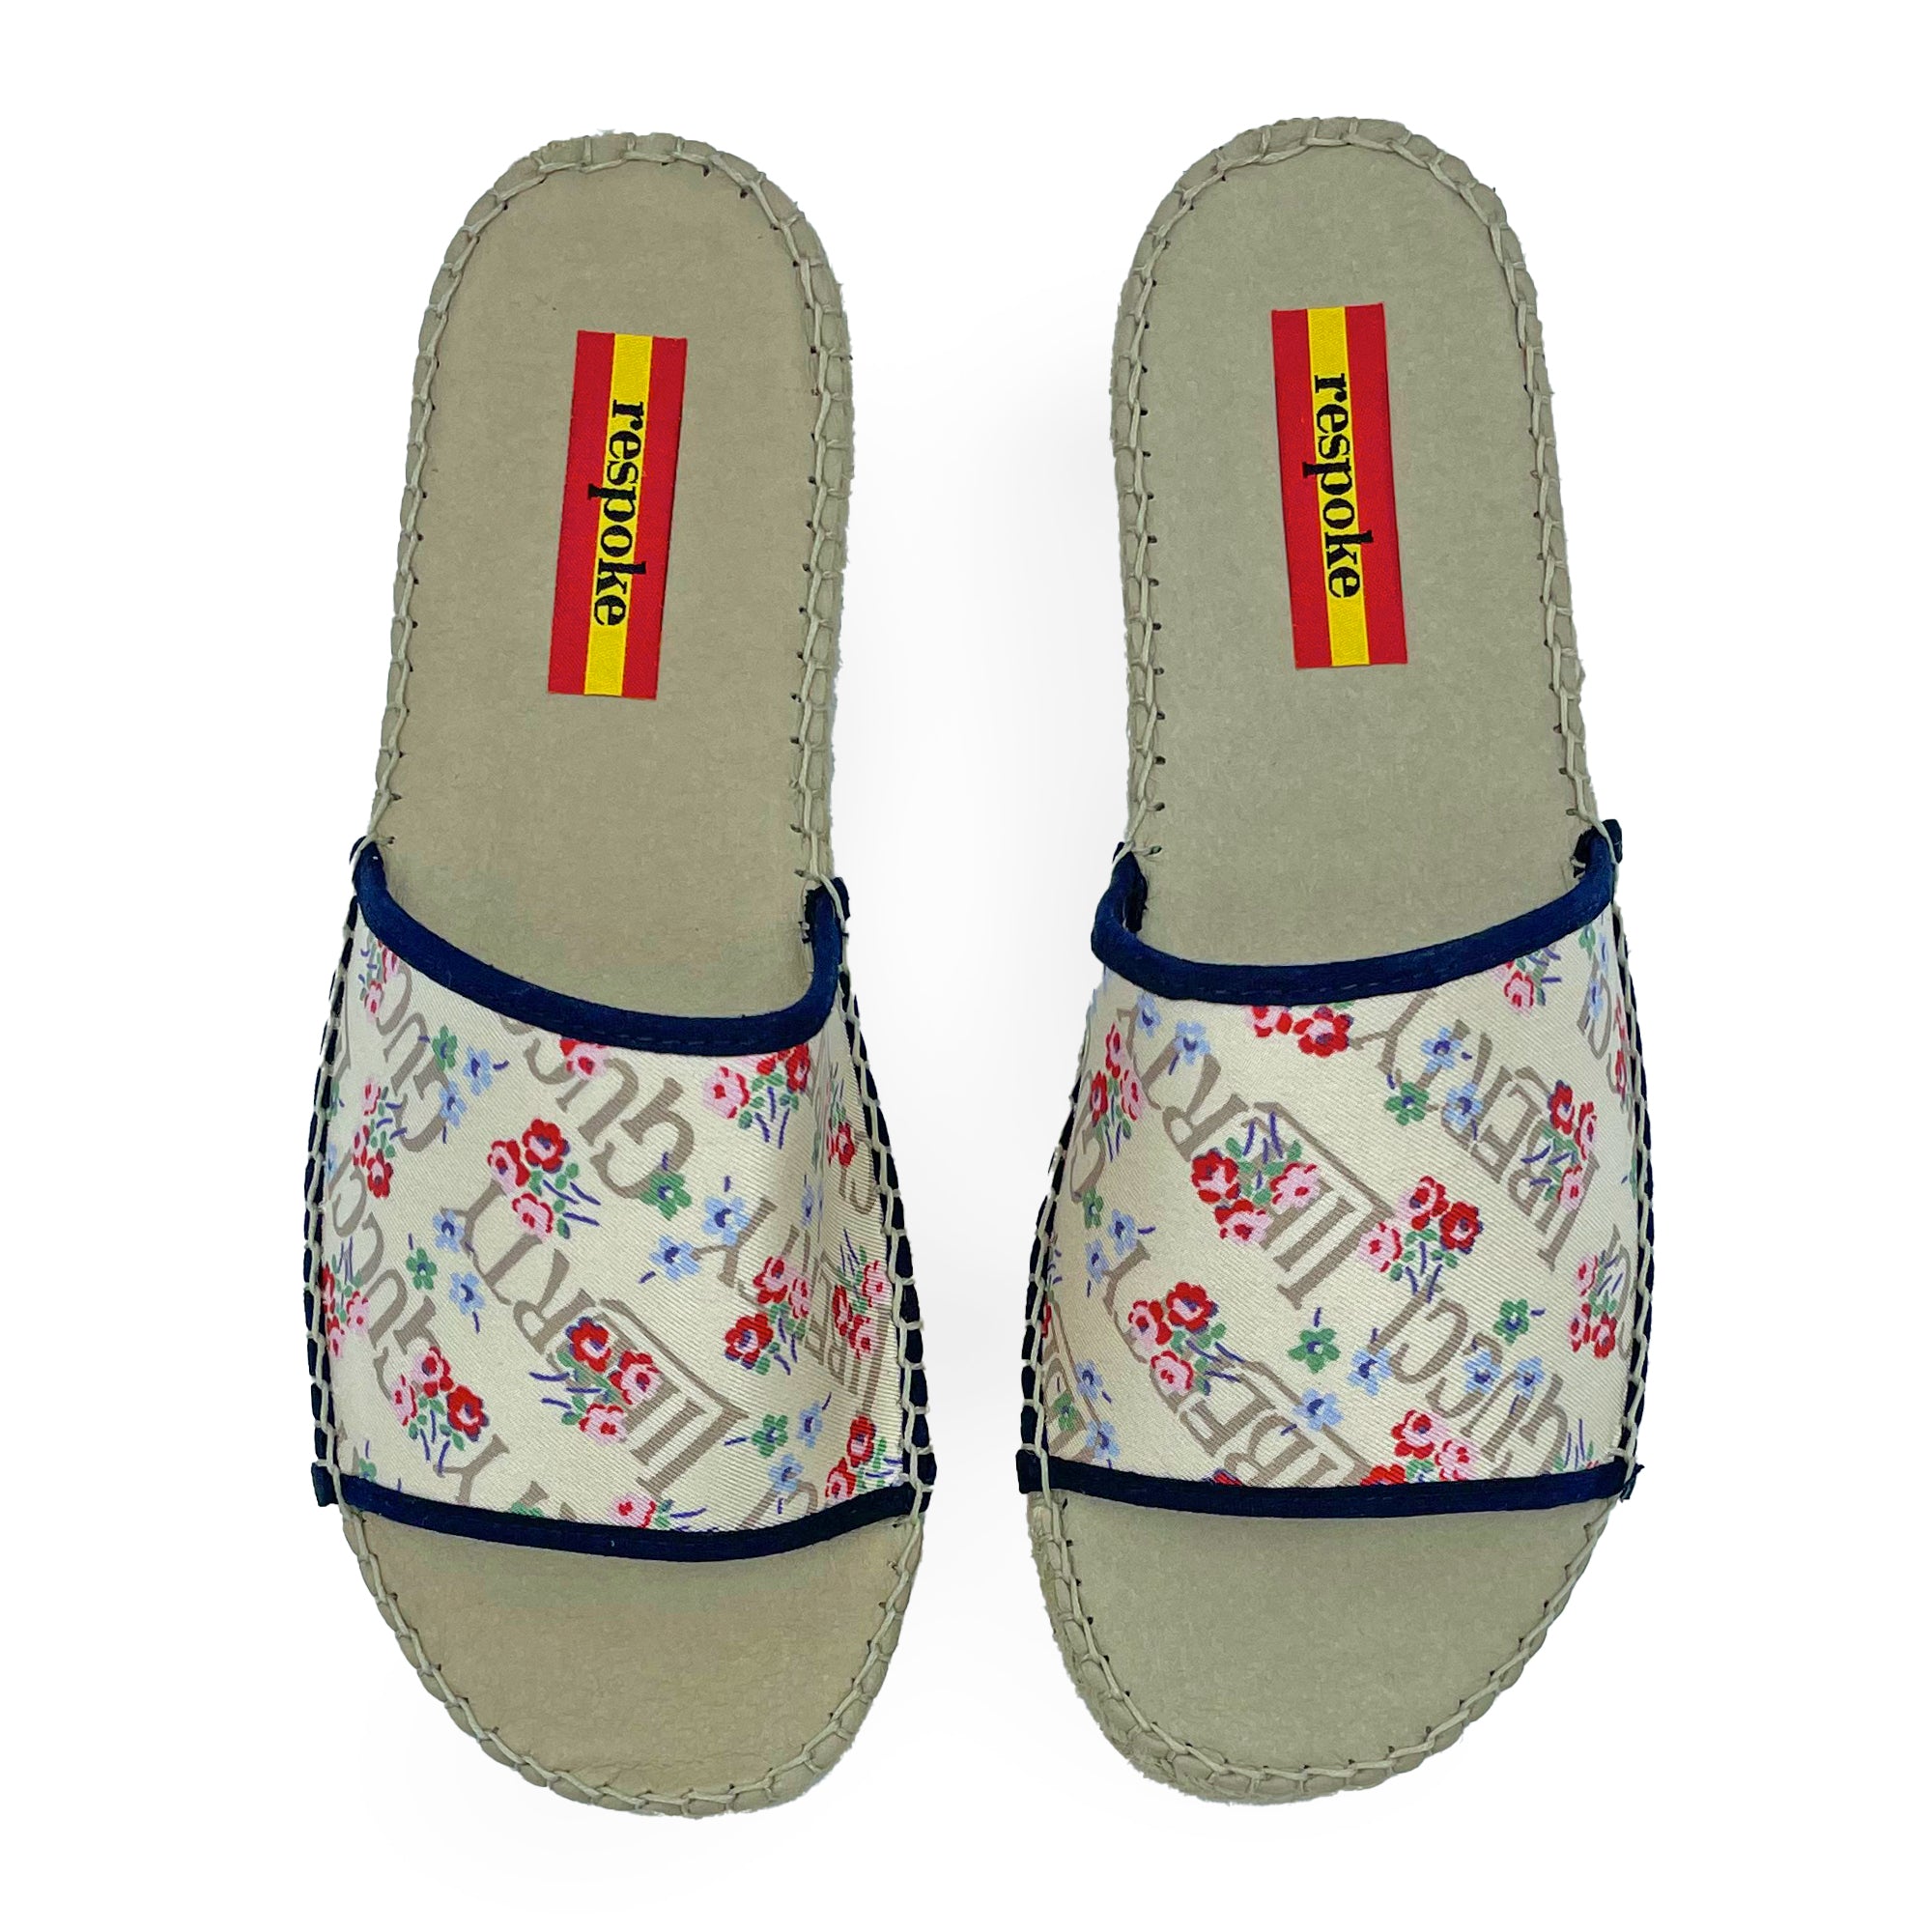 Respoke Dana Flip-Flop made from a Gucci scarf